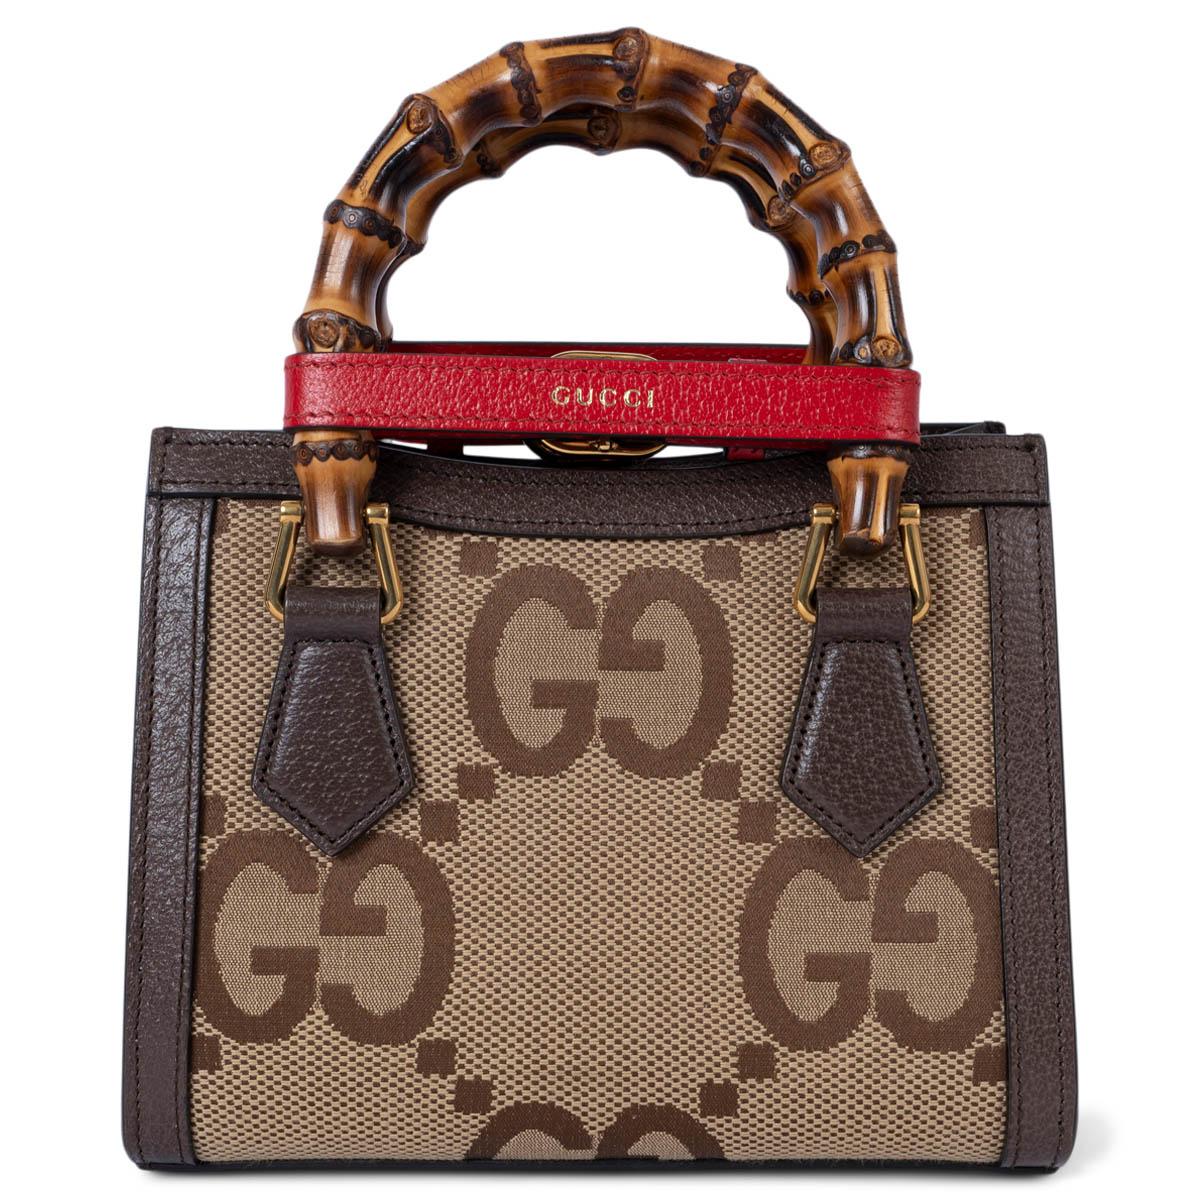 GUCCI camel ebony Jumbo GG DIANA MINI TOTE Shoulder Bag In Excellent Condition For Sale In Zürich, CH